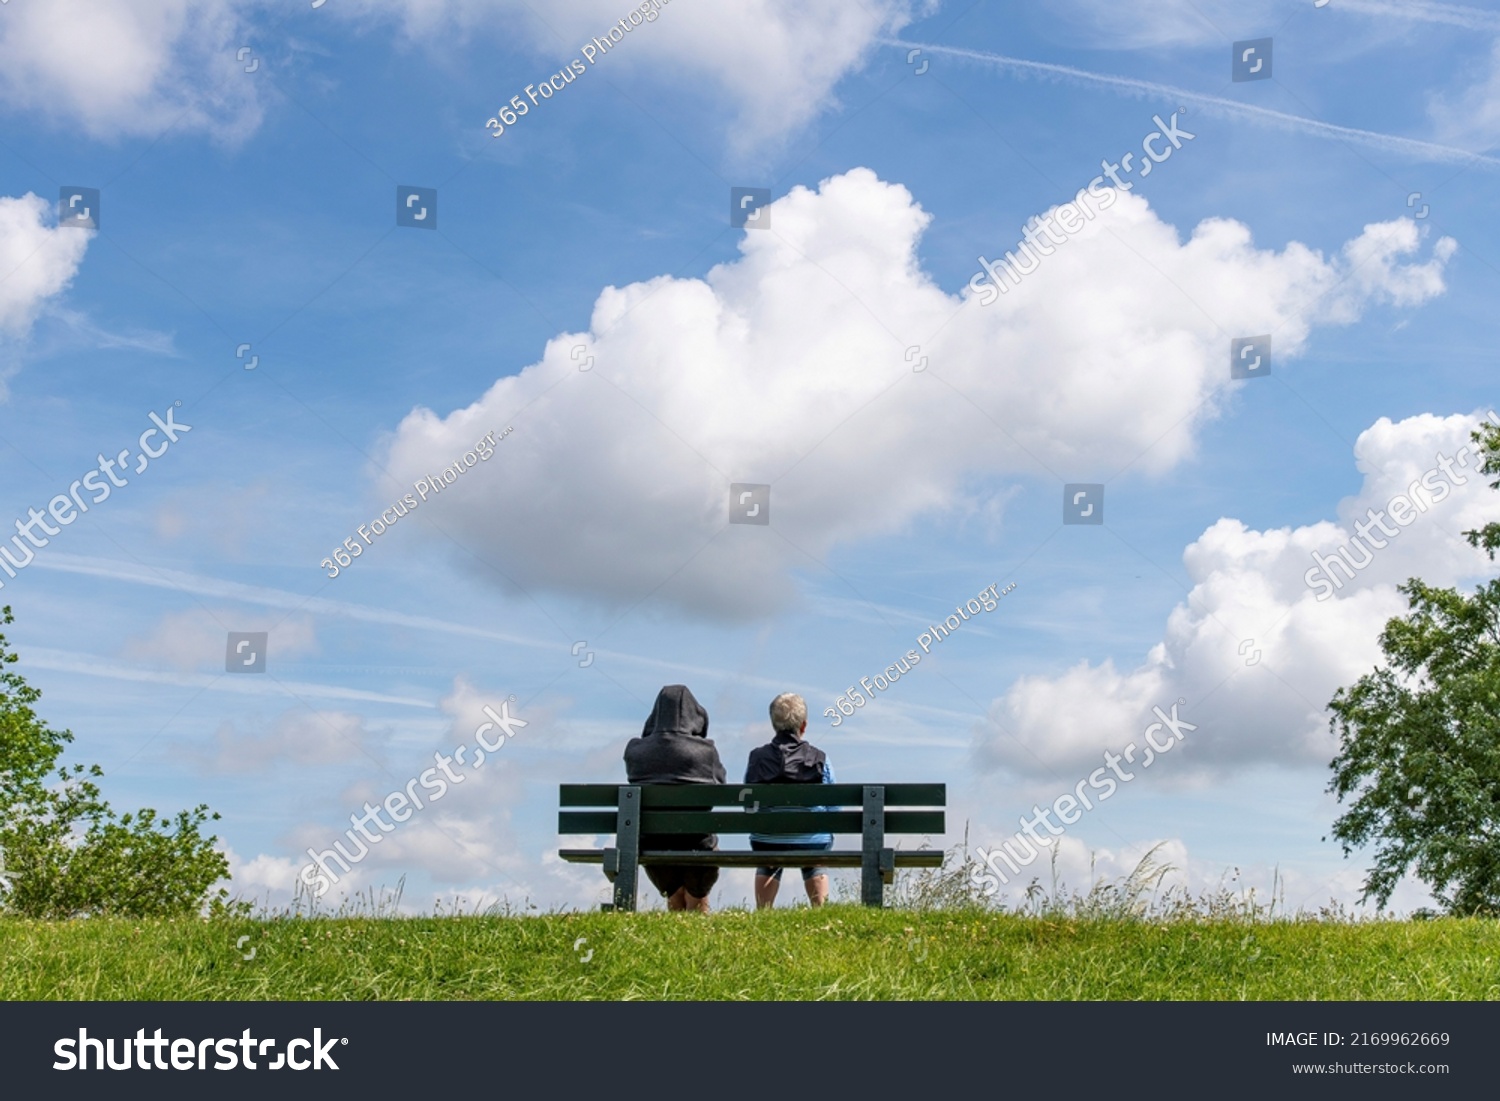 Low angle view of two people sitting on a park bench on top of a dike in the Netherlands looking in invisible distance with large cumulus clouds above in otherwise blue sky #2169962669